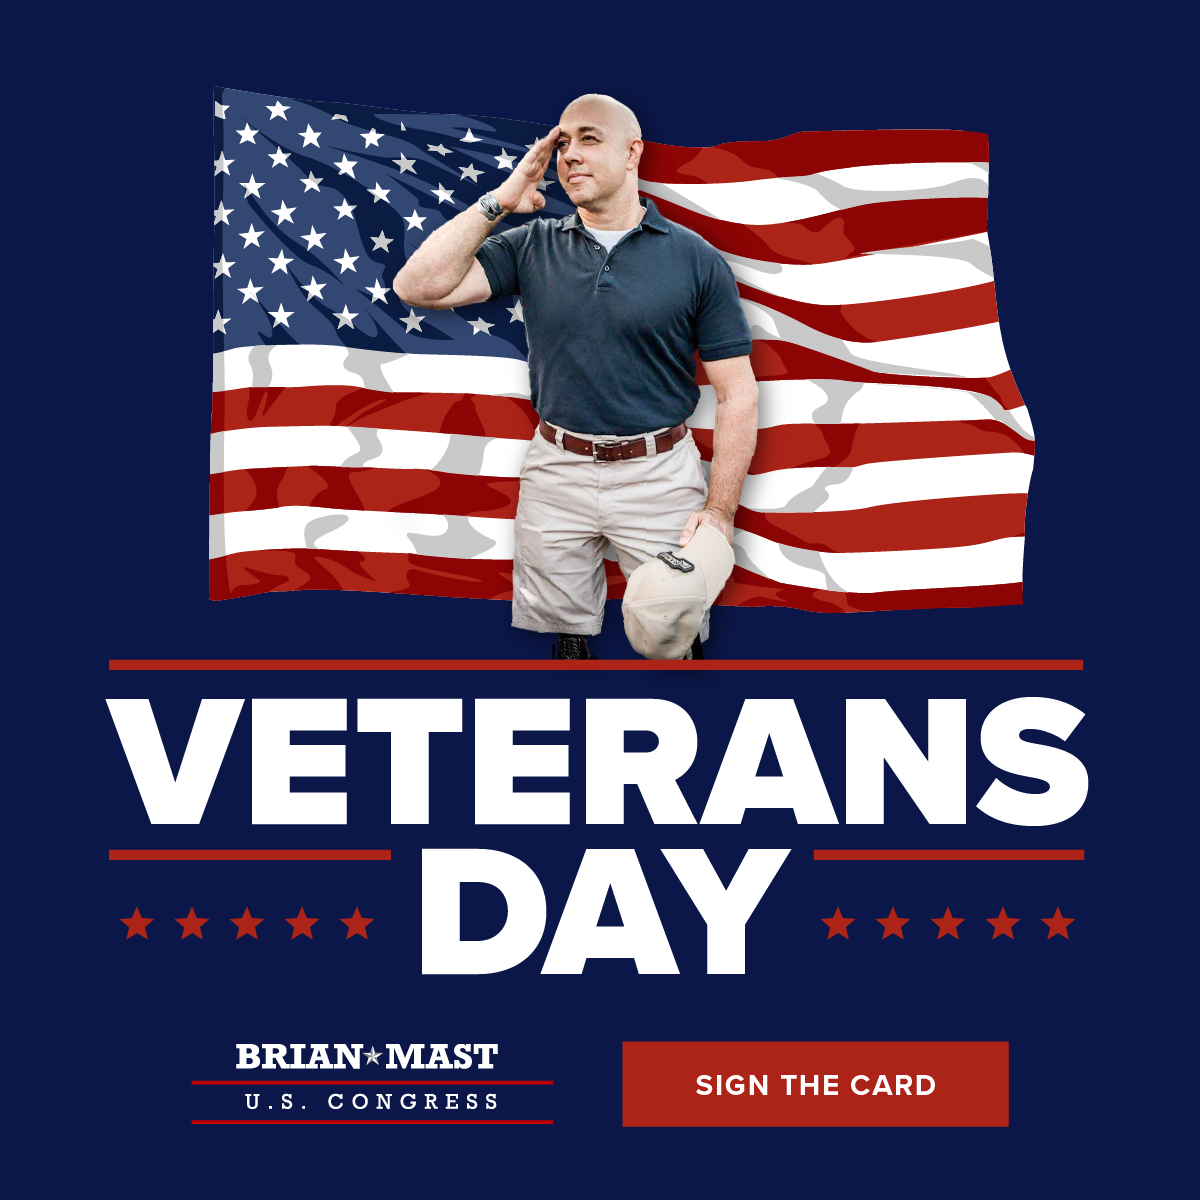 Sign the card: wish Brian a Happy Veterans Day!